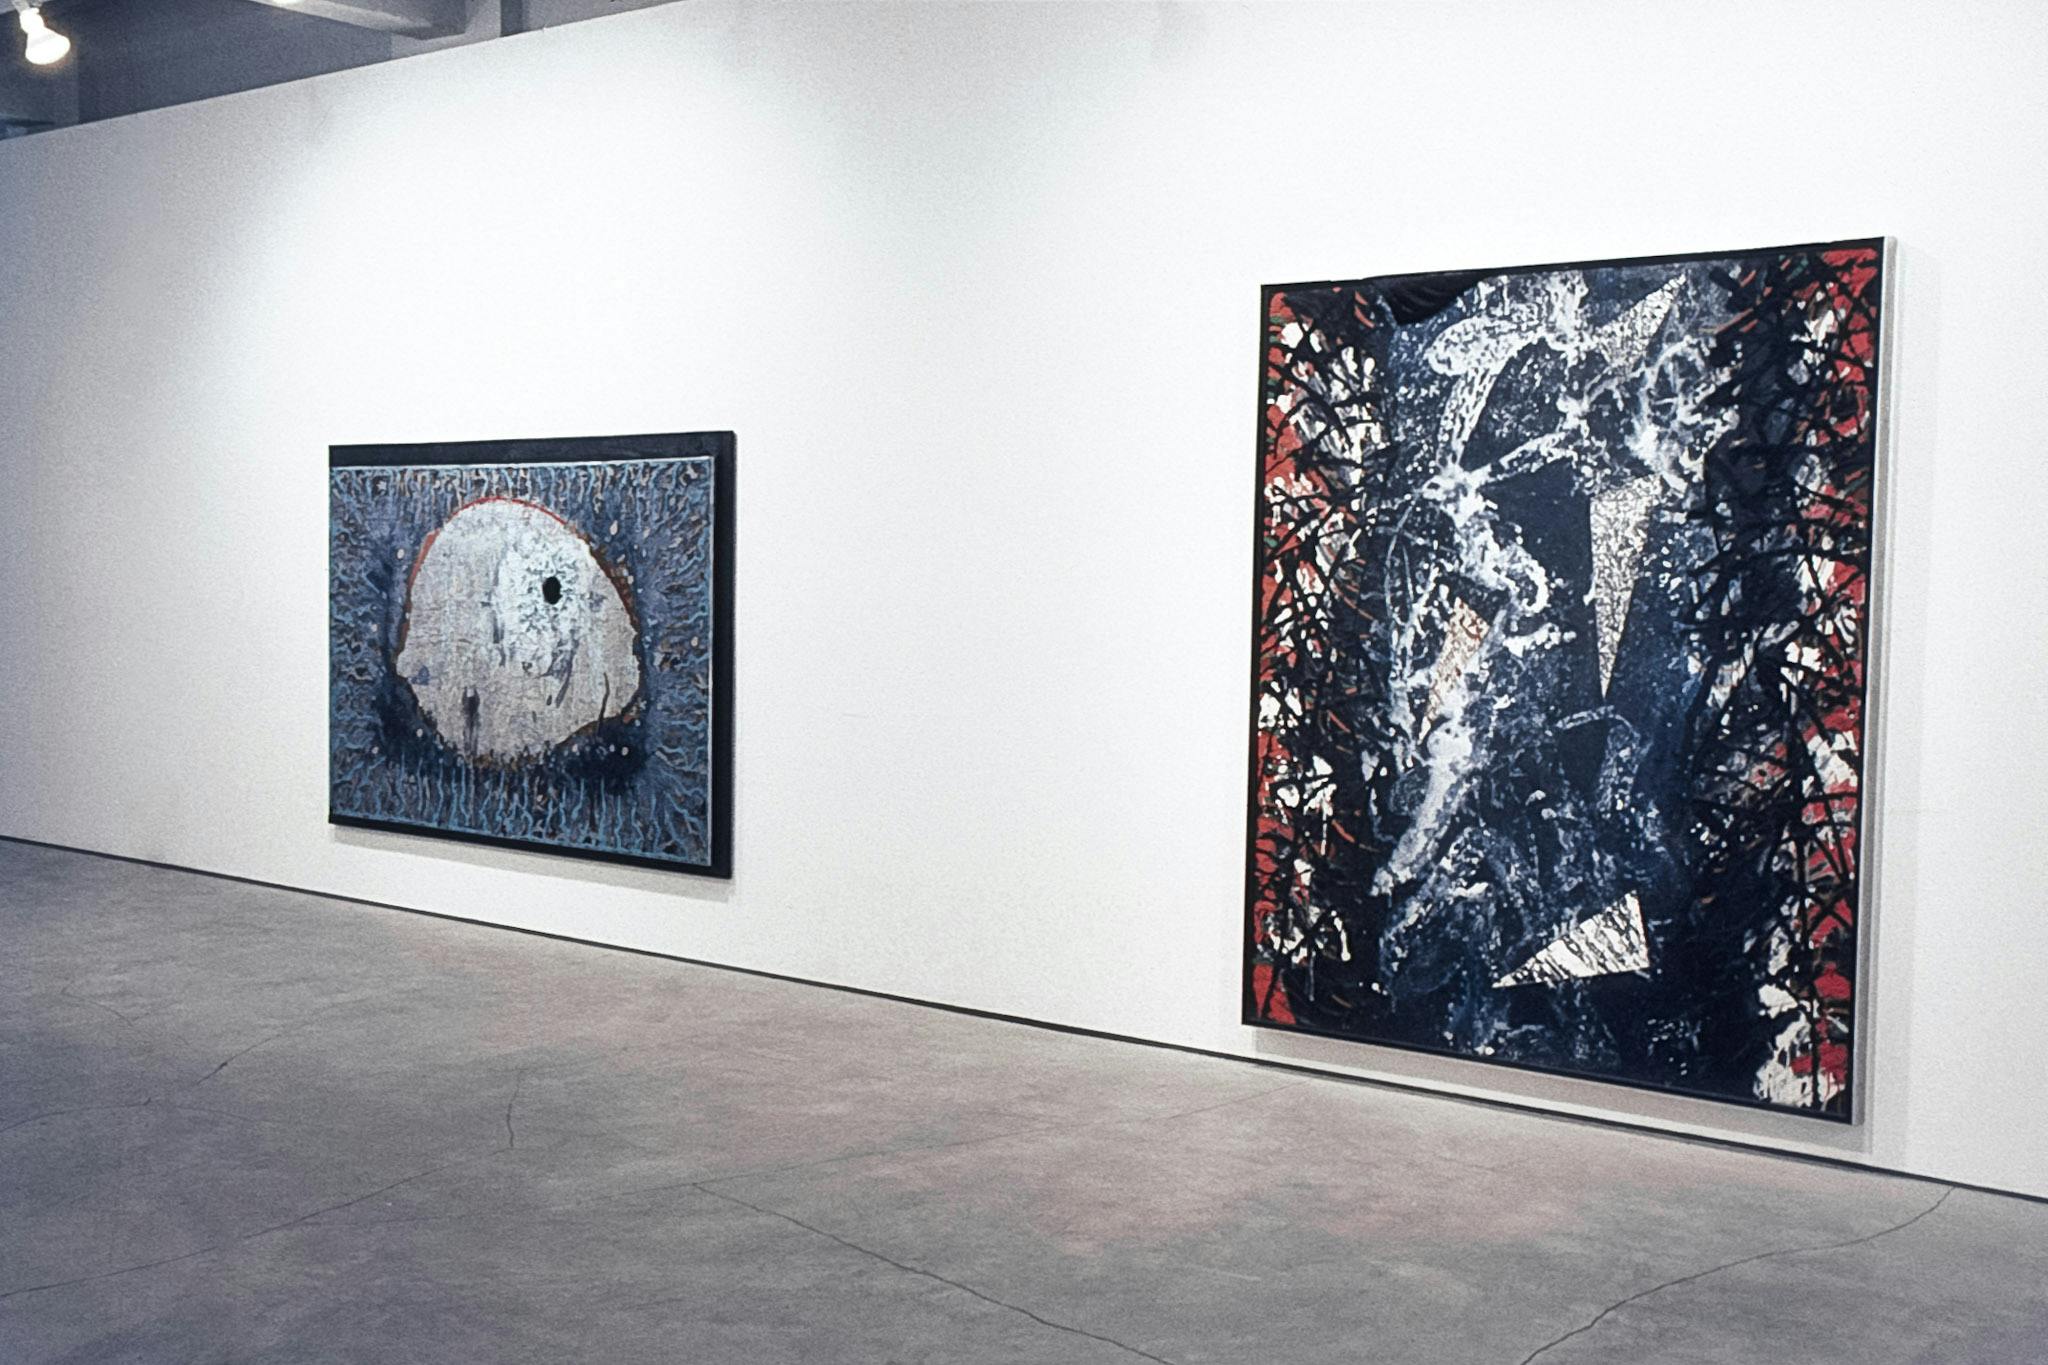 2 paintings on a wall. The one in the foreground has red edges and a black centre. The surface is made by splattering and swirling paint. Small, triangular strips of material can be seen throughout. 